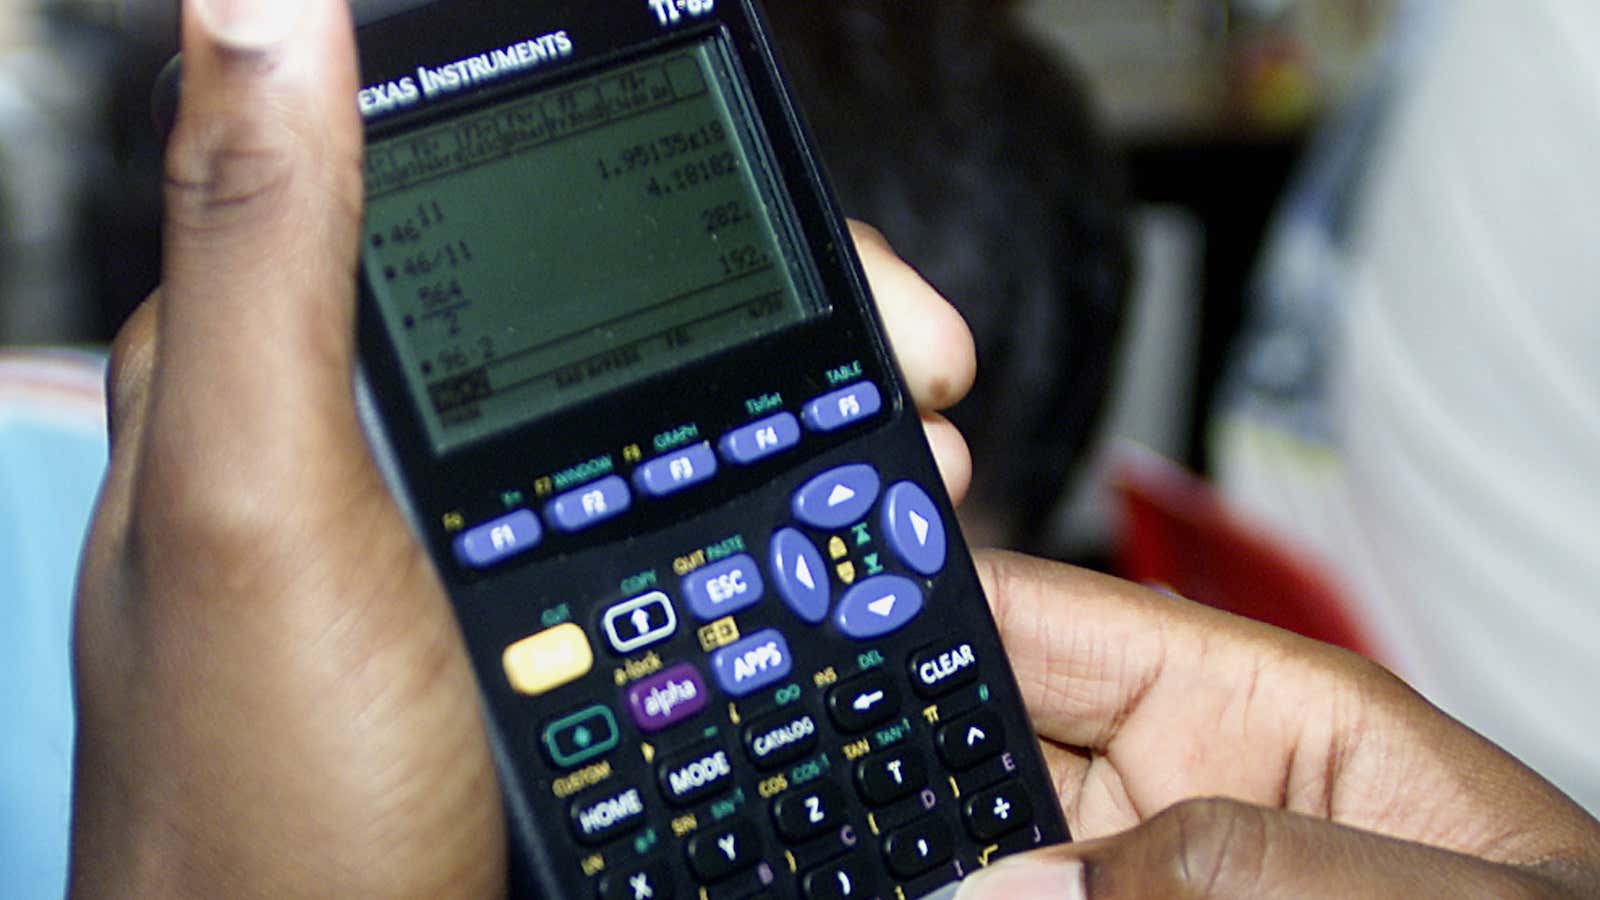 A Texas Instruments graphing calculator.